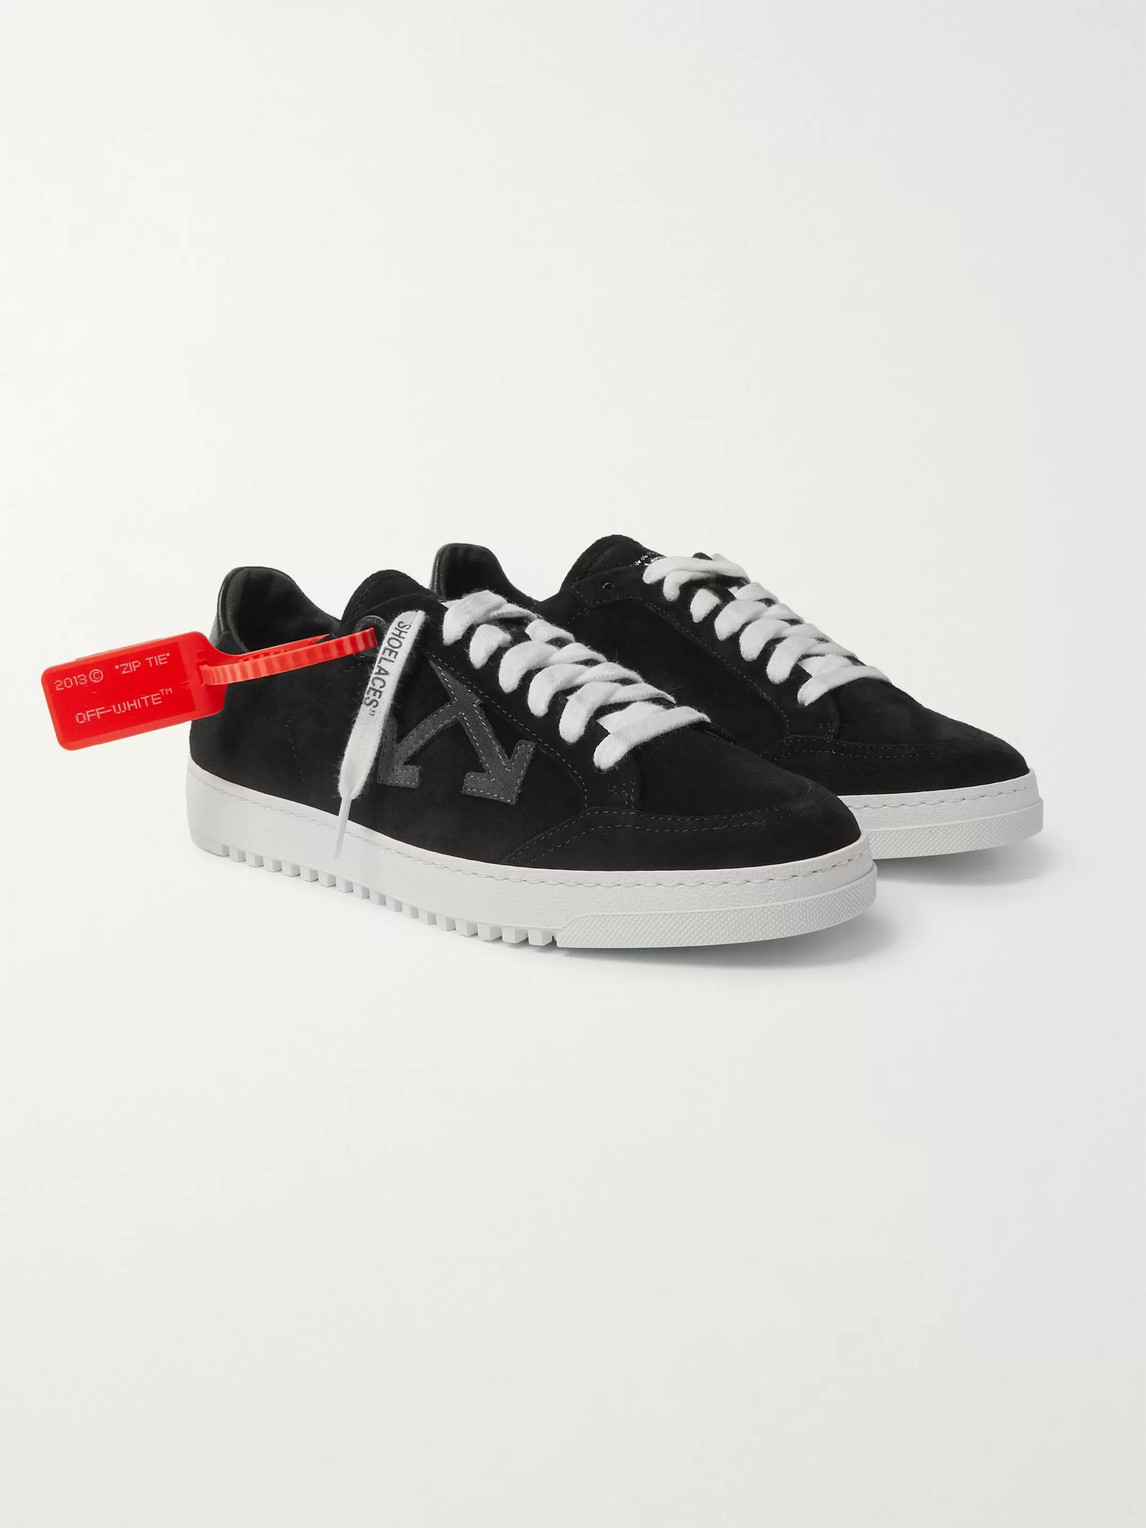 OFF-WHITE 2.0 LEATHER-TRIMMED SUEDE SNEAKERS